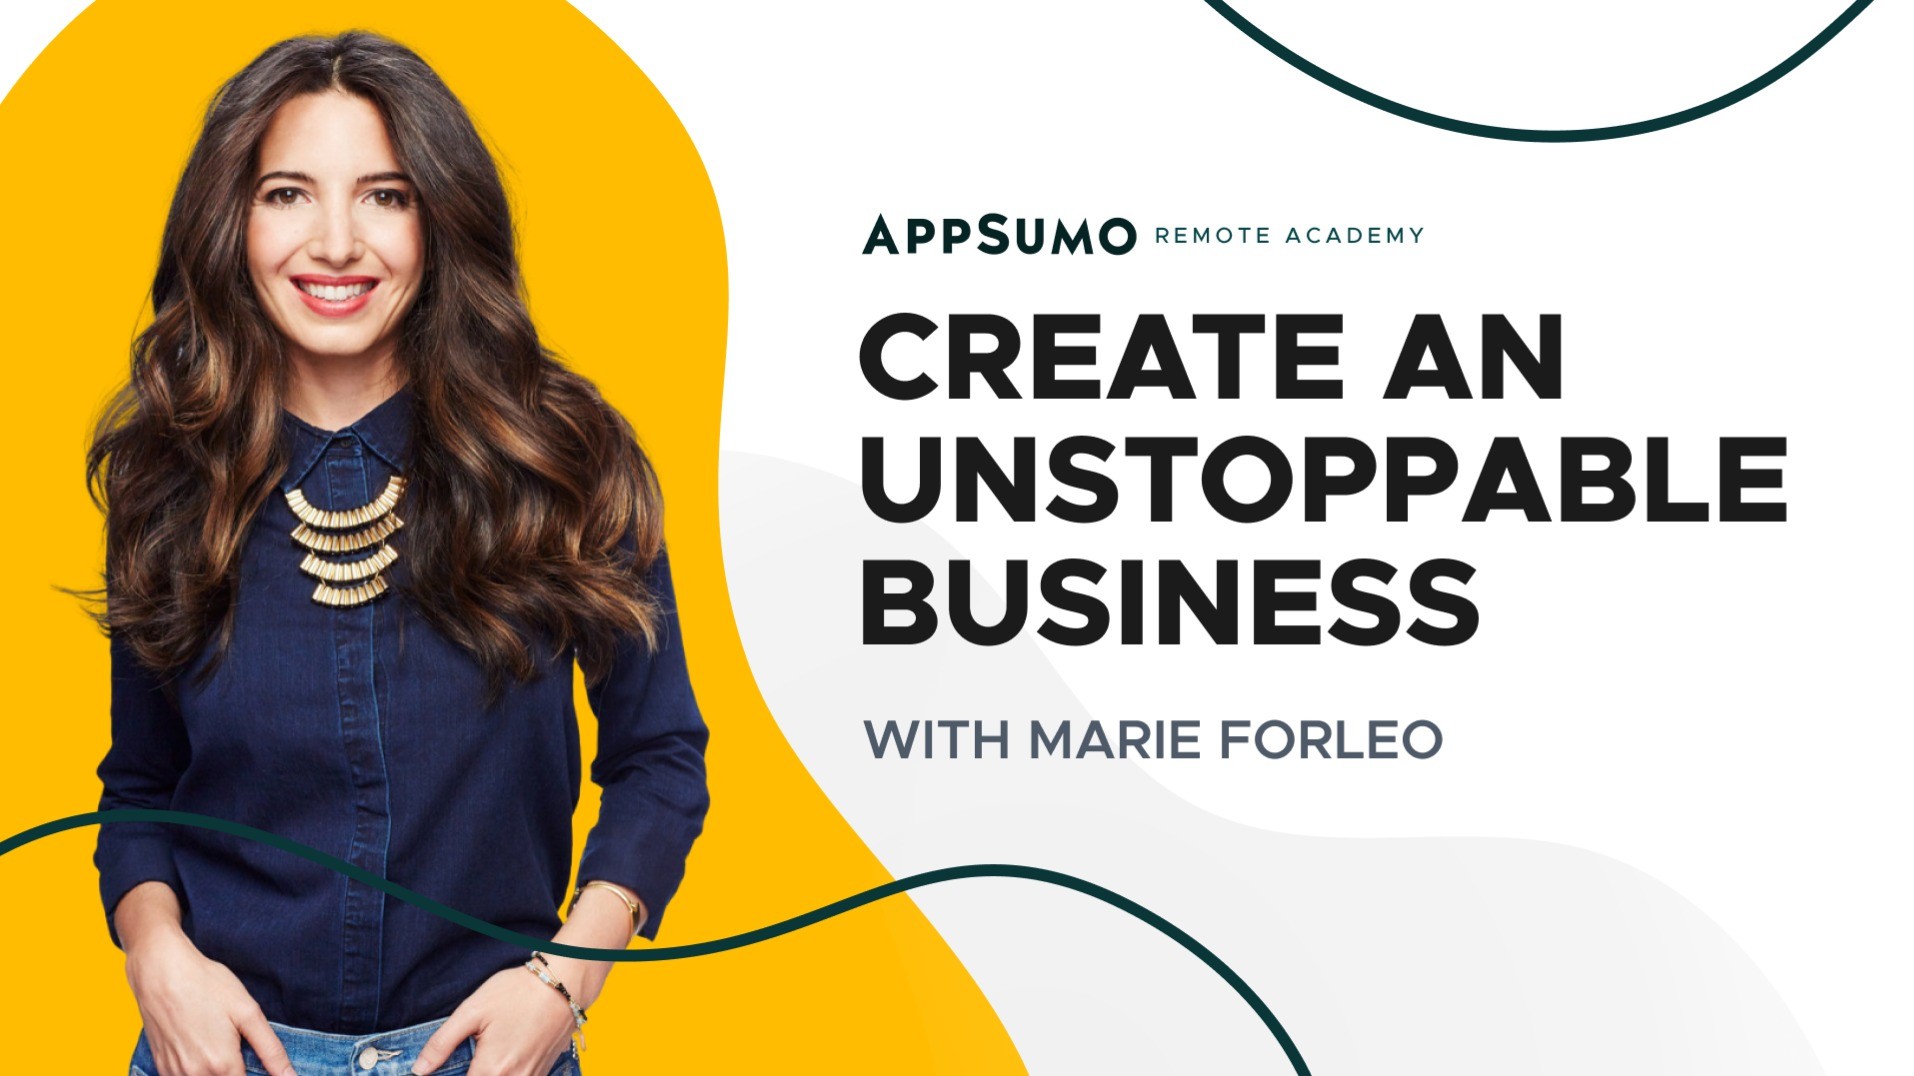 AppSumo Deal for Remote Work Academy: The Disciplined Pursuit of Less - Plus exclusive